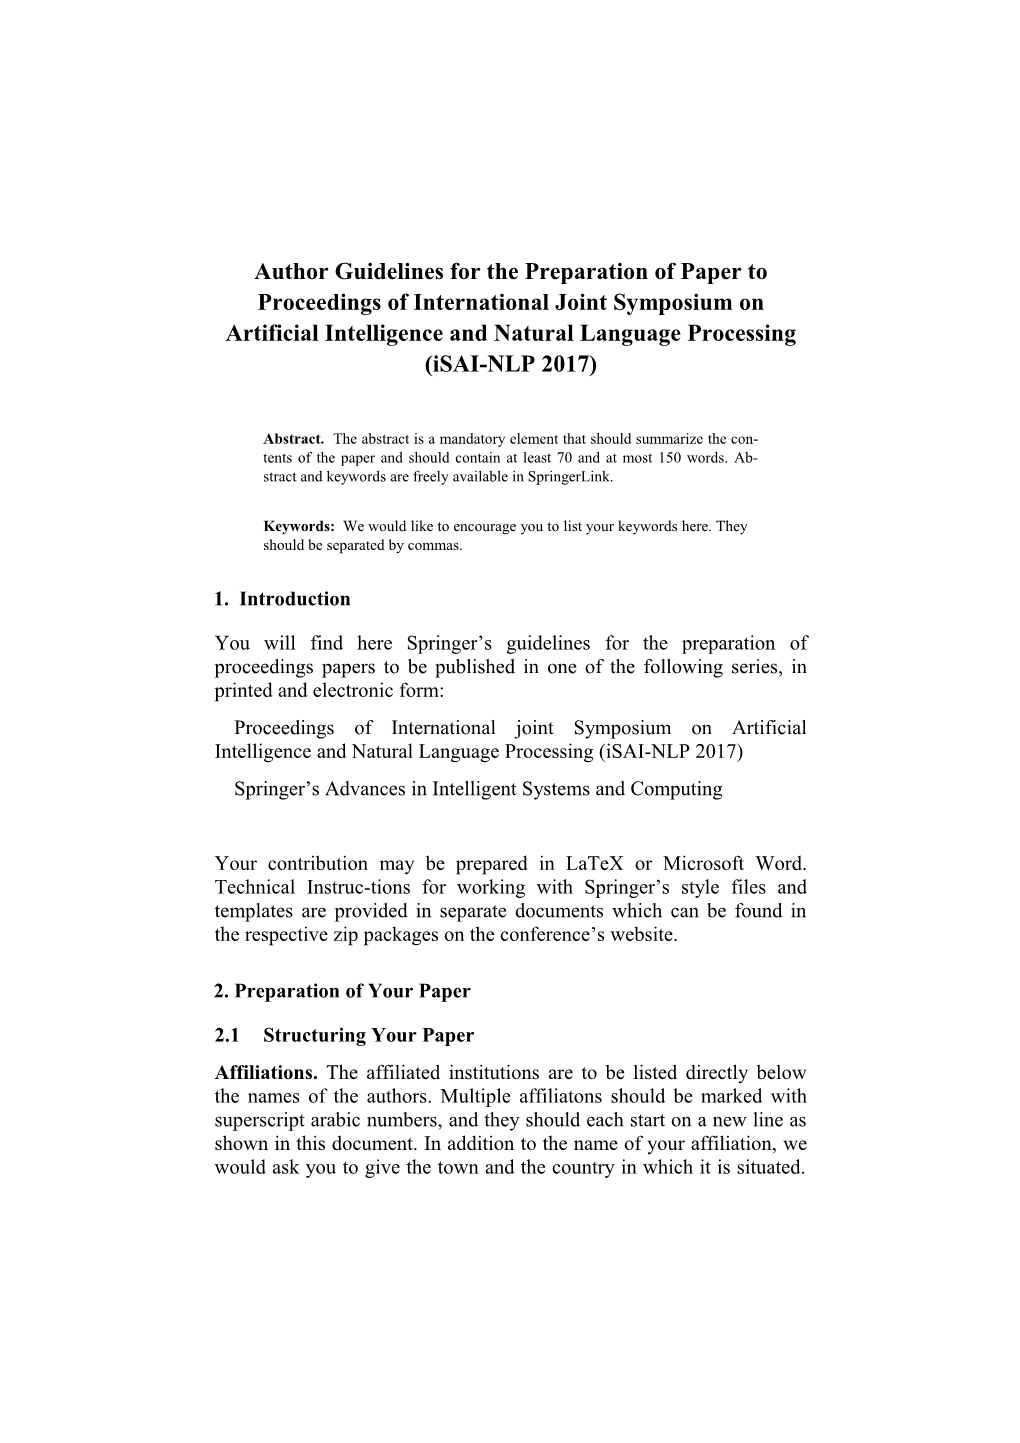 Author Guidelines for the Preparation of Paper to Proceedings of International Joint Symposium